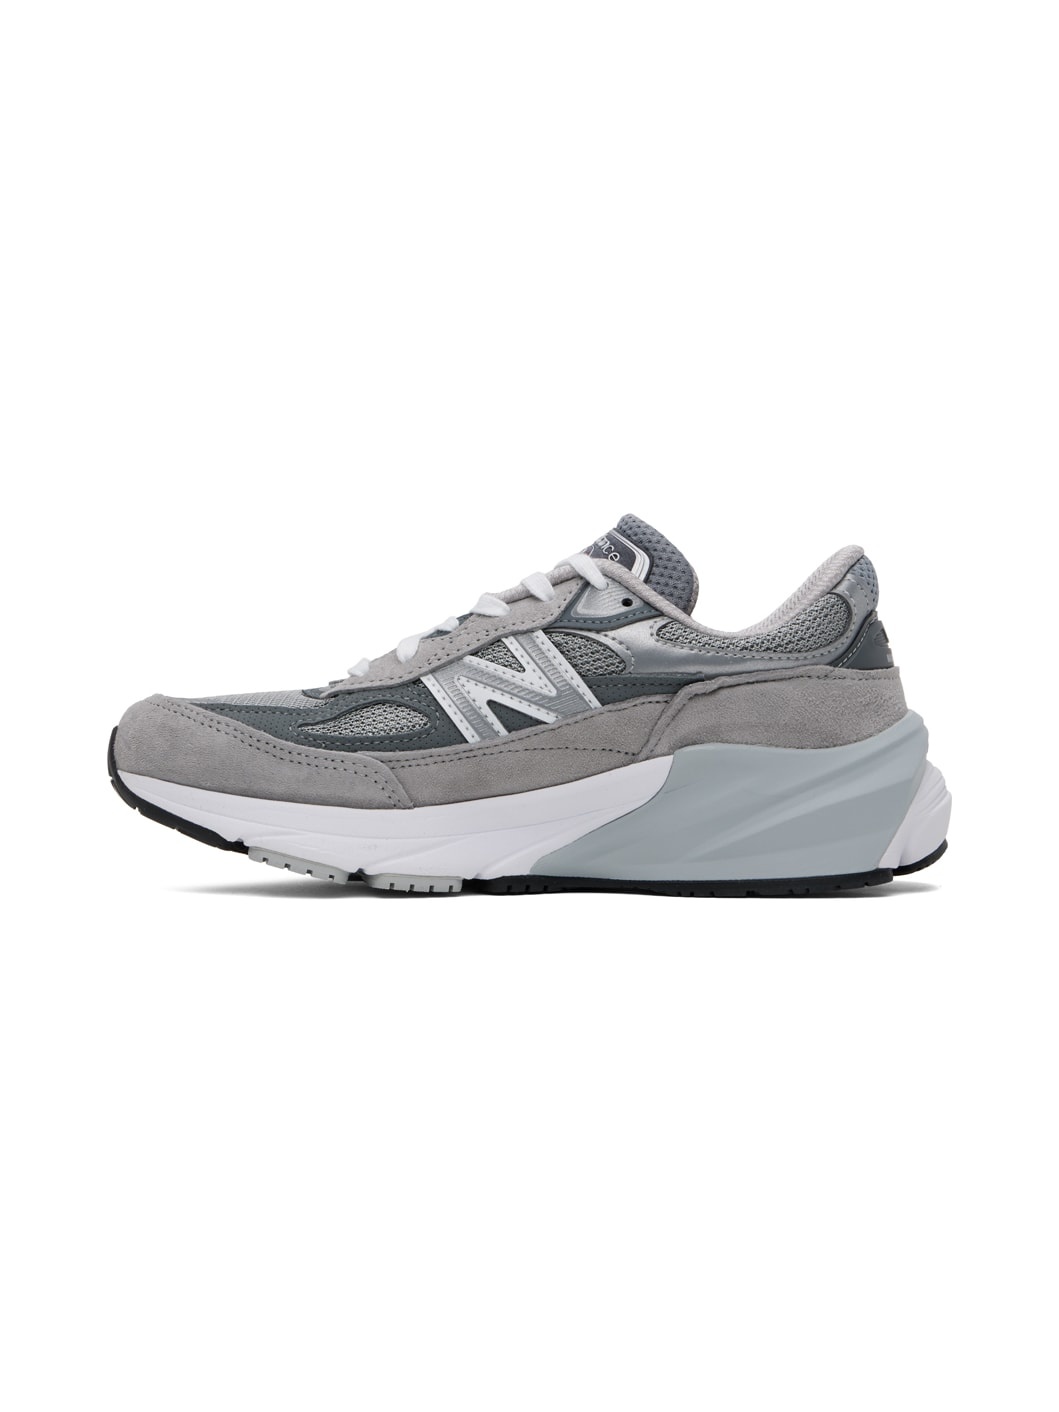 Gray Made In USA 990v6 Sneakers - 3